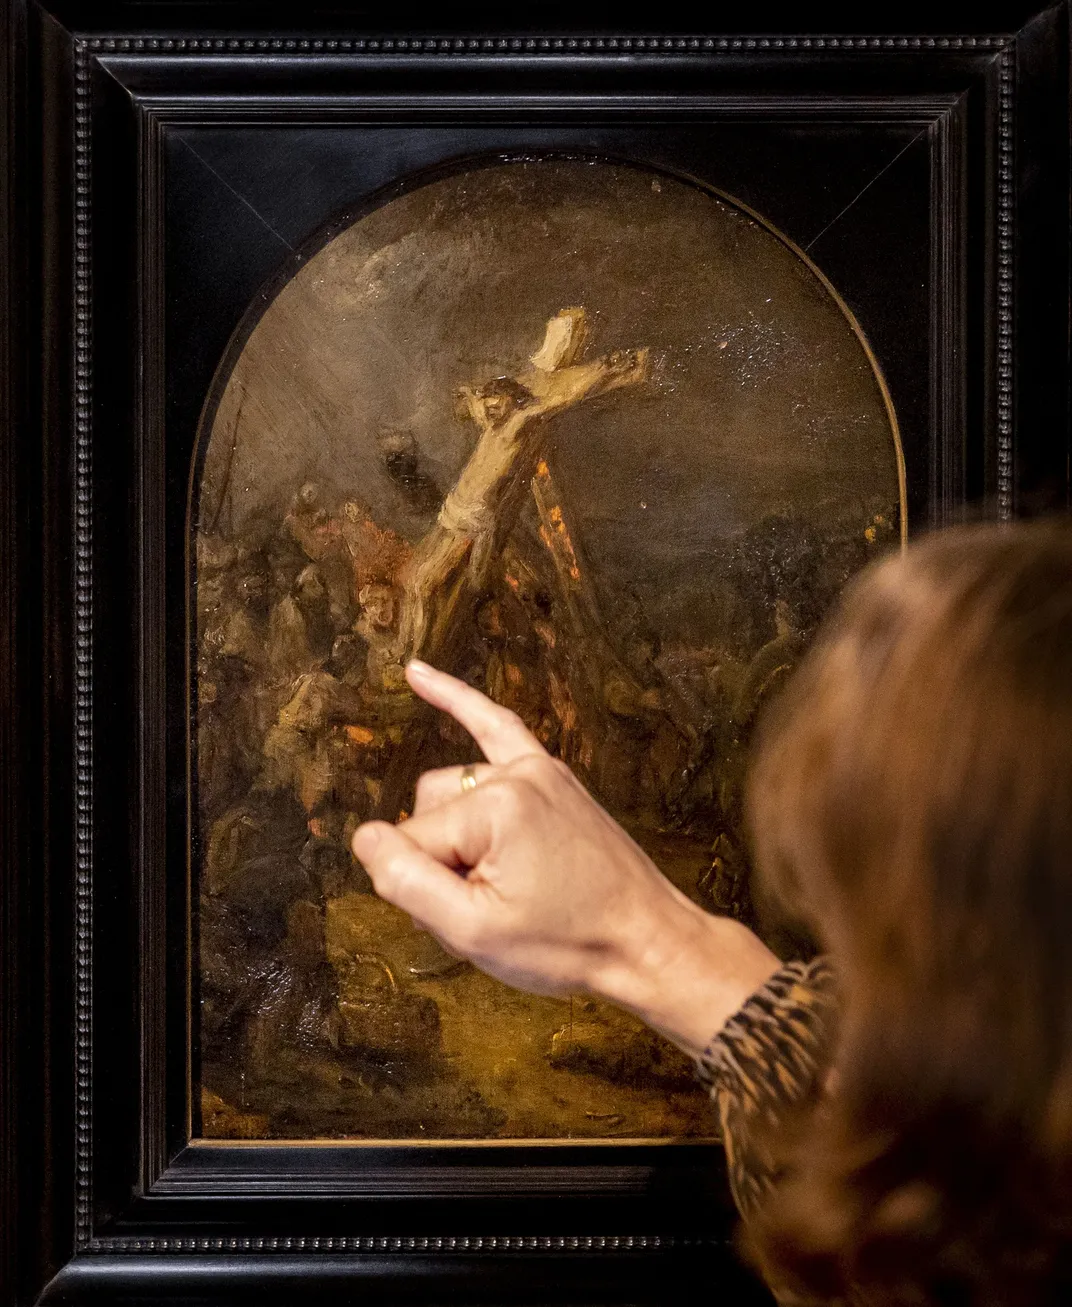 A visitor looks at The Creation of Jesus on the Cross by Rembrandt